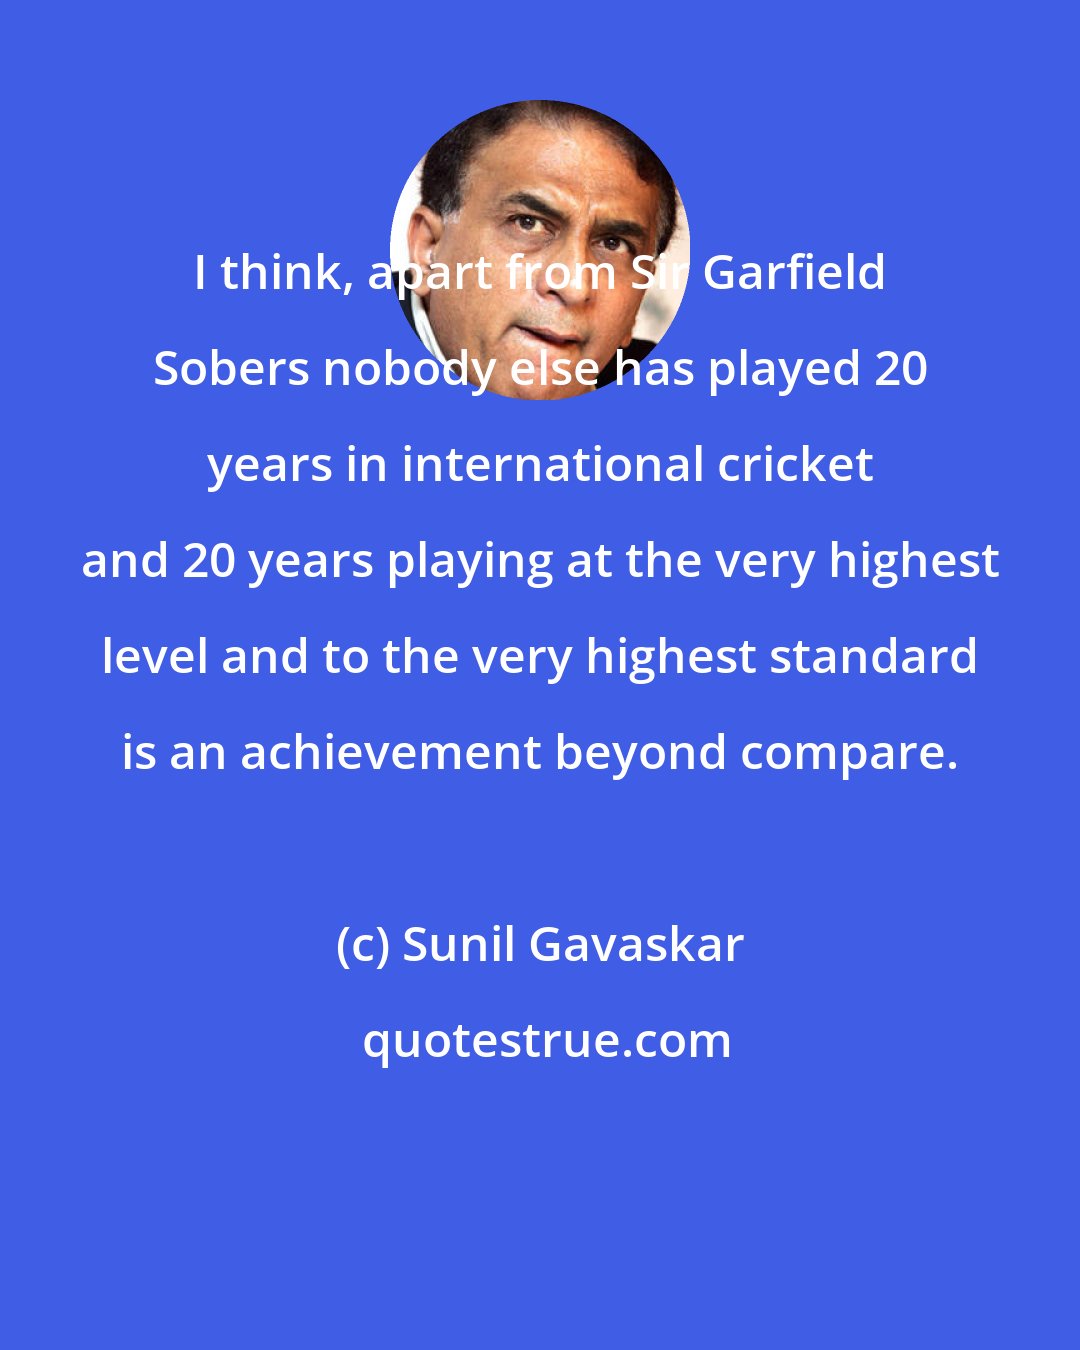 Sunil Gavaskar: I think, apart from Sir Garfield Sobers nobody else has played 20 years in international cricket and 20 years playing at the very highest level and to the very highest standard is an achievement beyond compare.